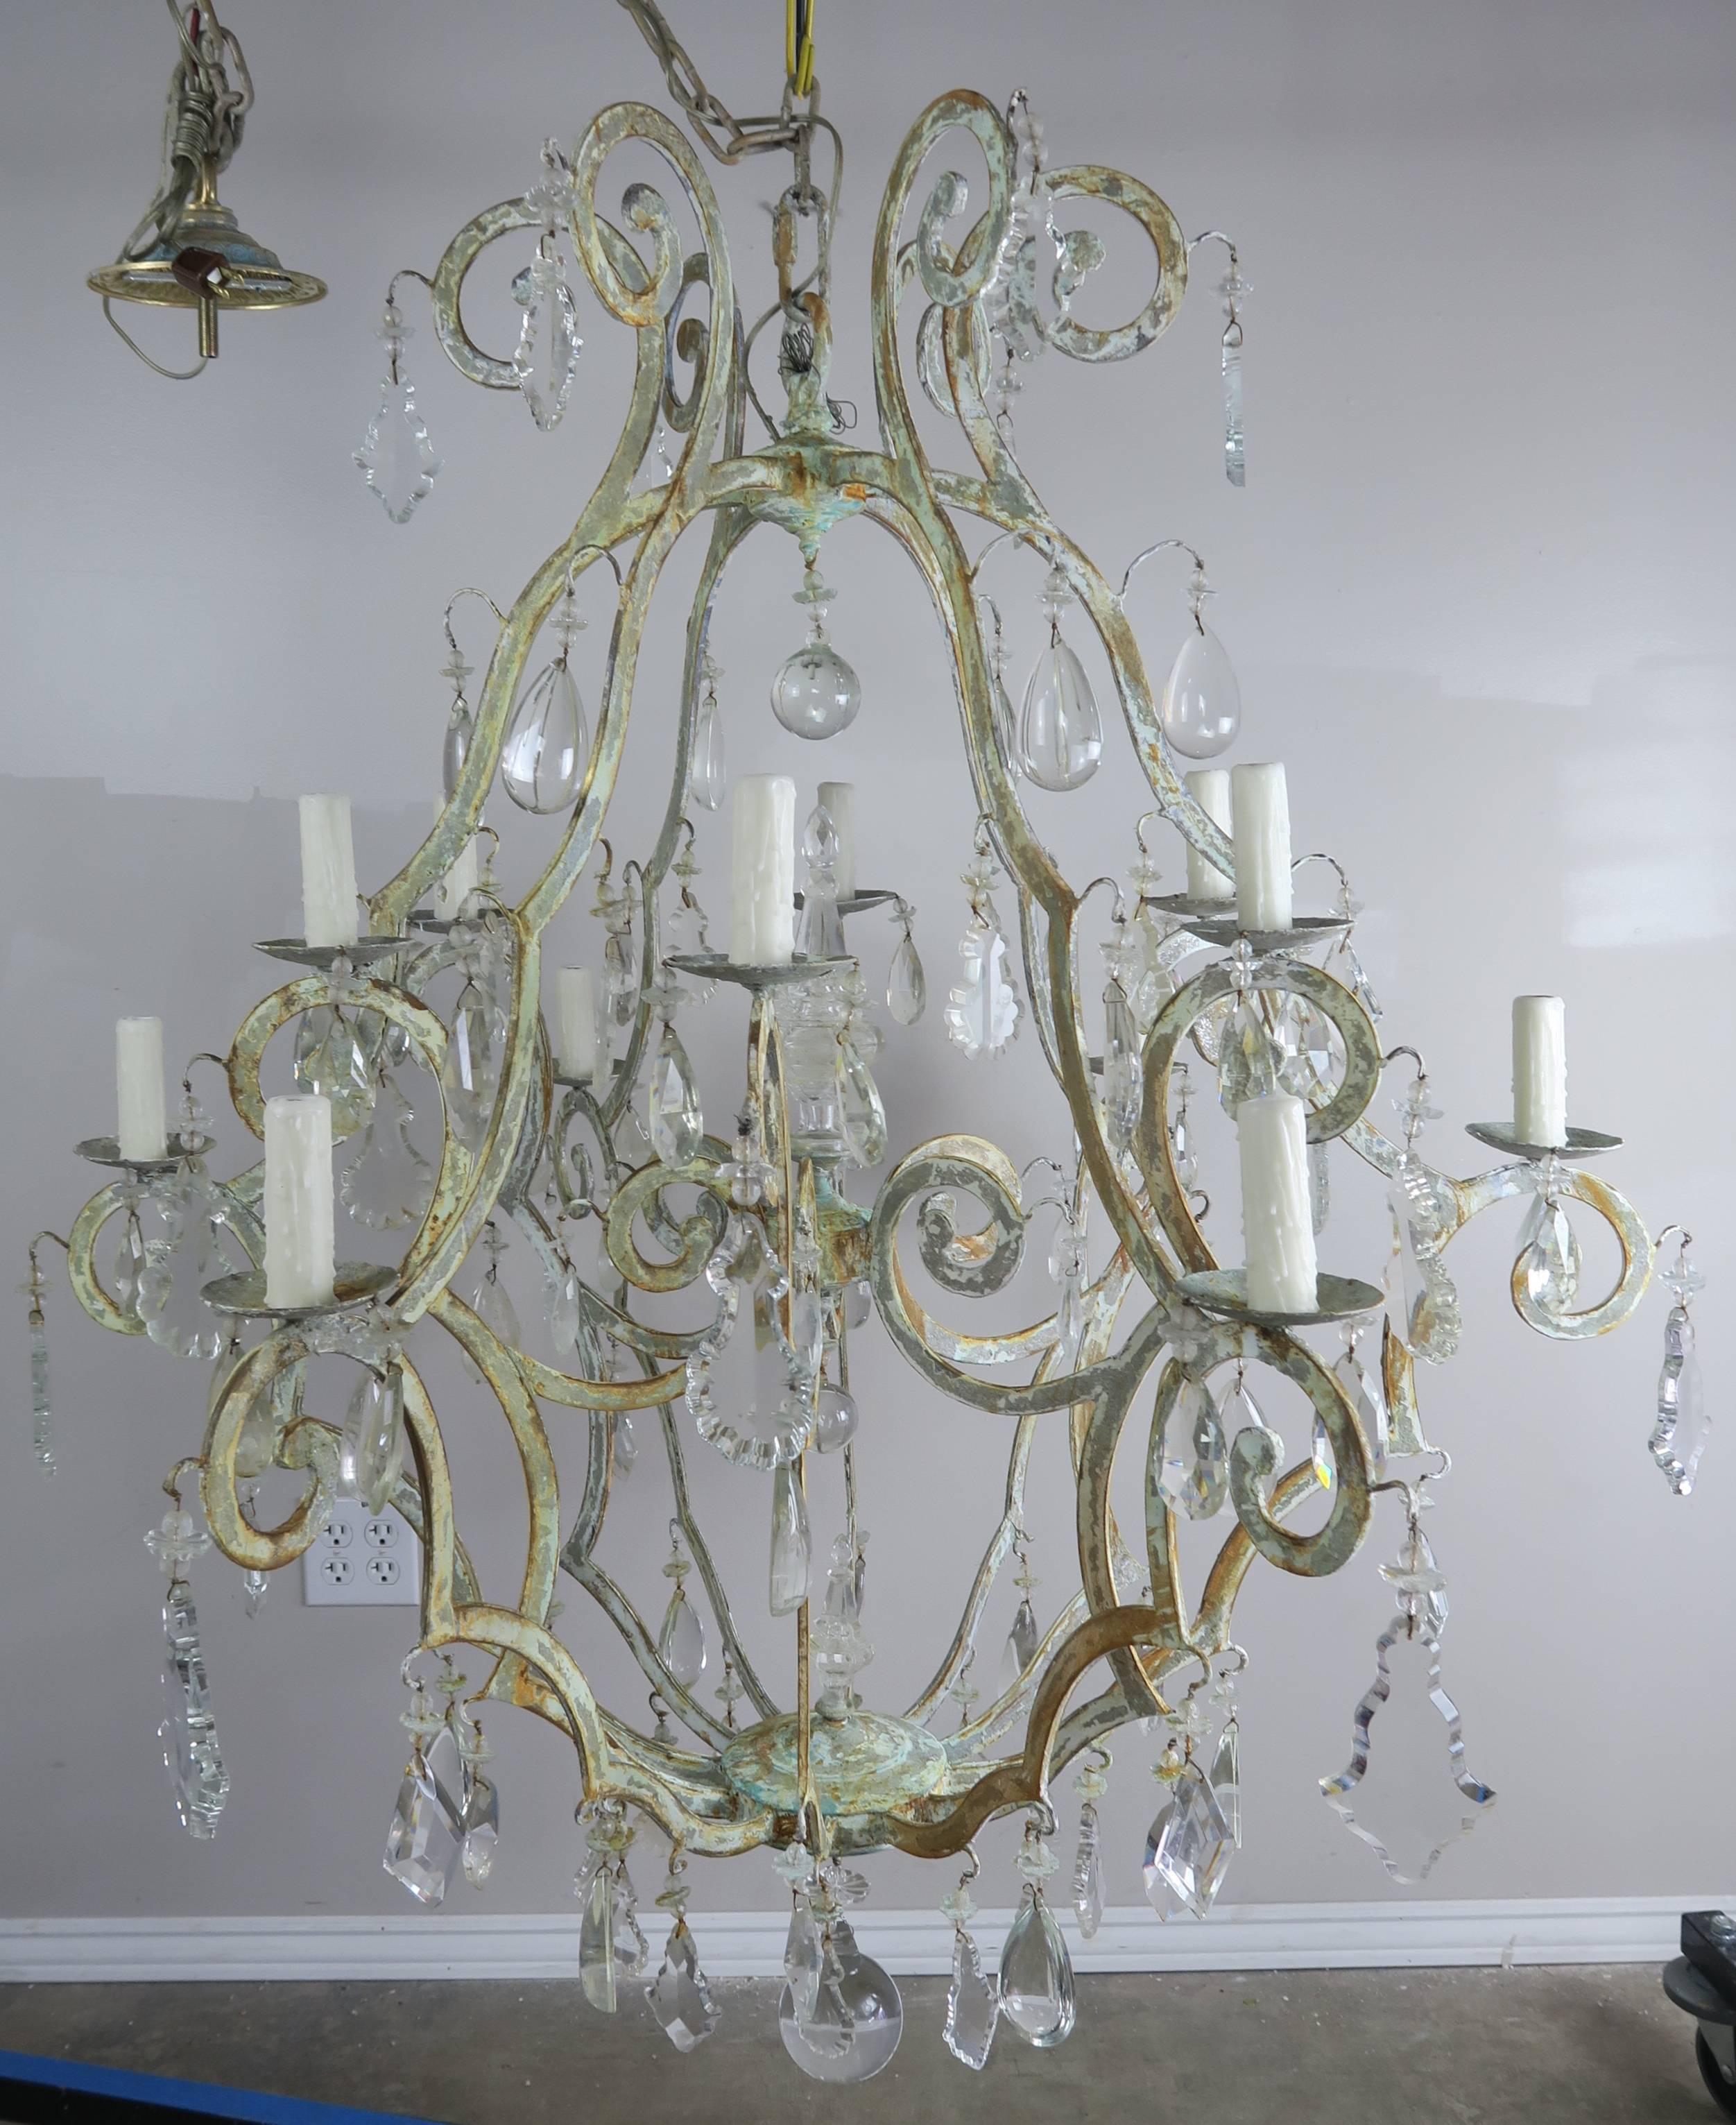 Italian wrought iron twelve-light chandelier with a beautiful soft painted finish depicting shades of worn paint from years of use. The fixture has been newly rewired with drip wax candle covers. It includes chain and canopy and is ready to install.